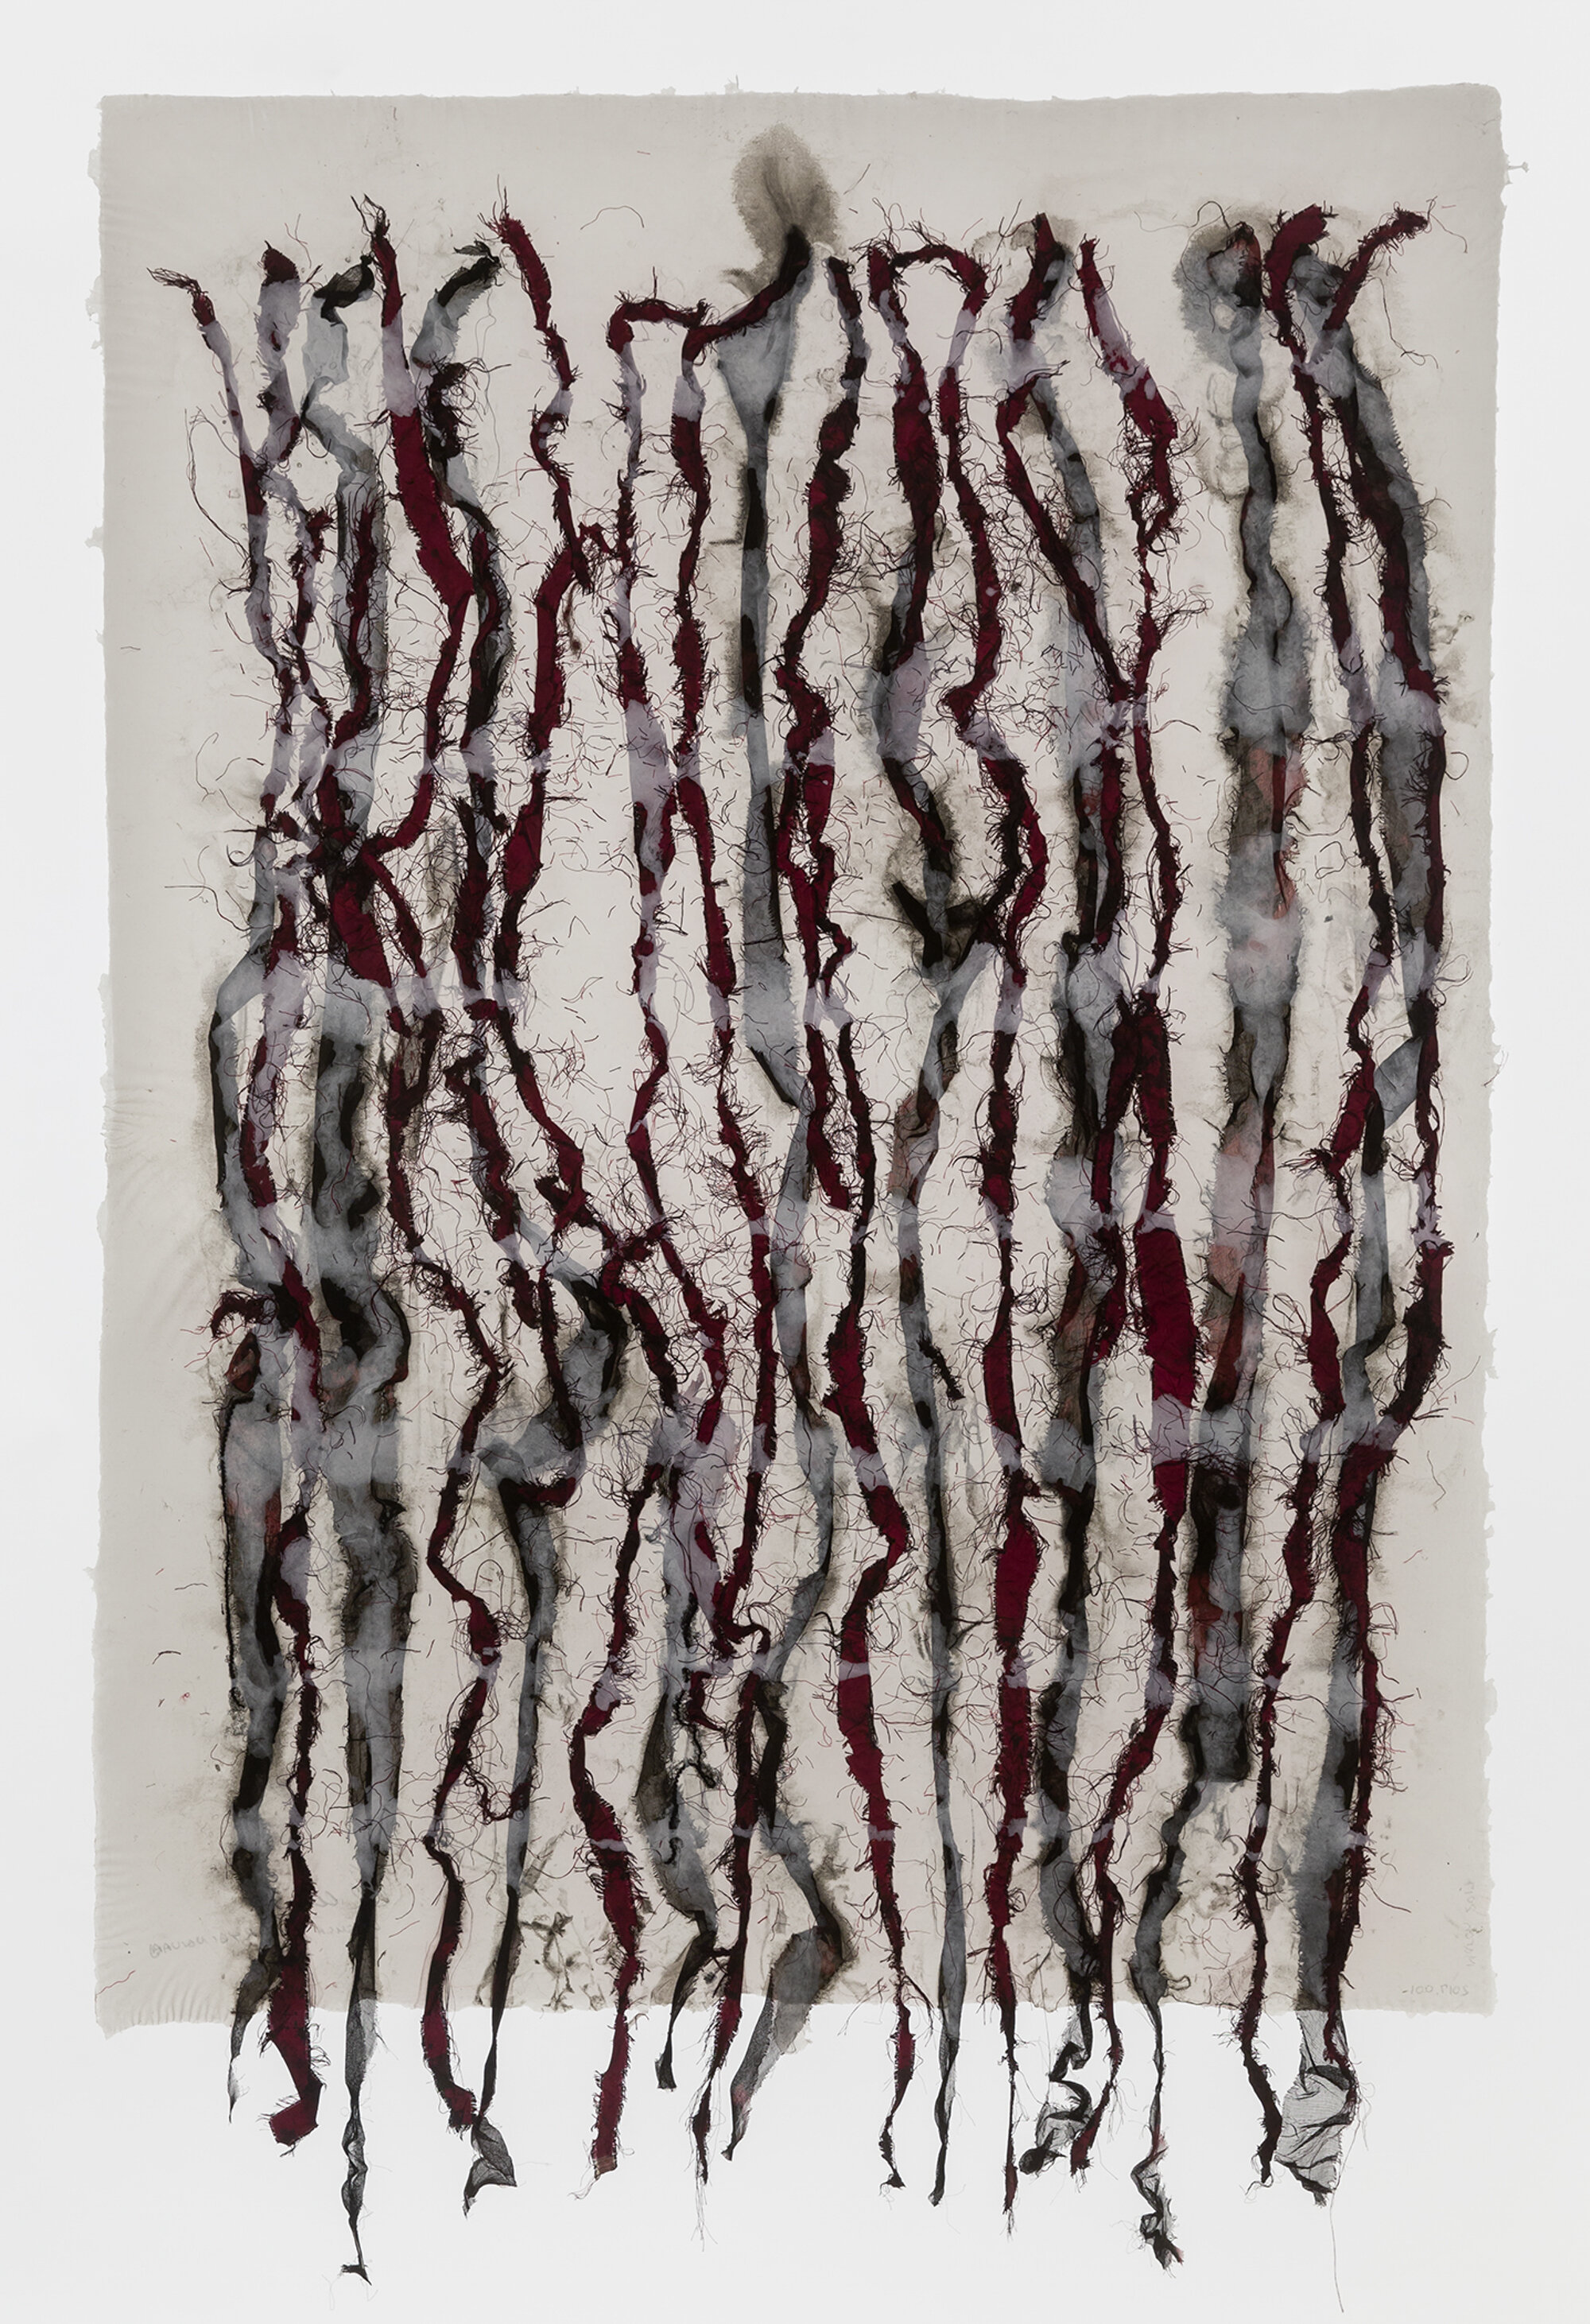   Untitled , 2017 Silk, pigment, pulp, and linen handmade paper 34 x 21.5 in. Paper Dimensions: 29.5 x 21.5 in. 